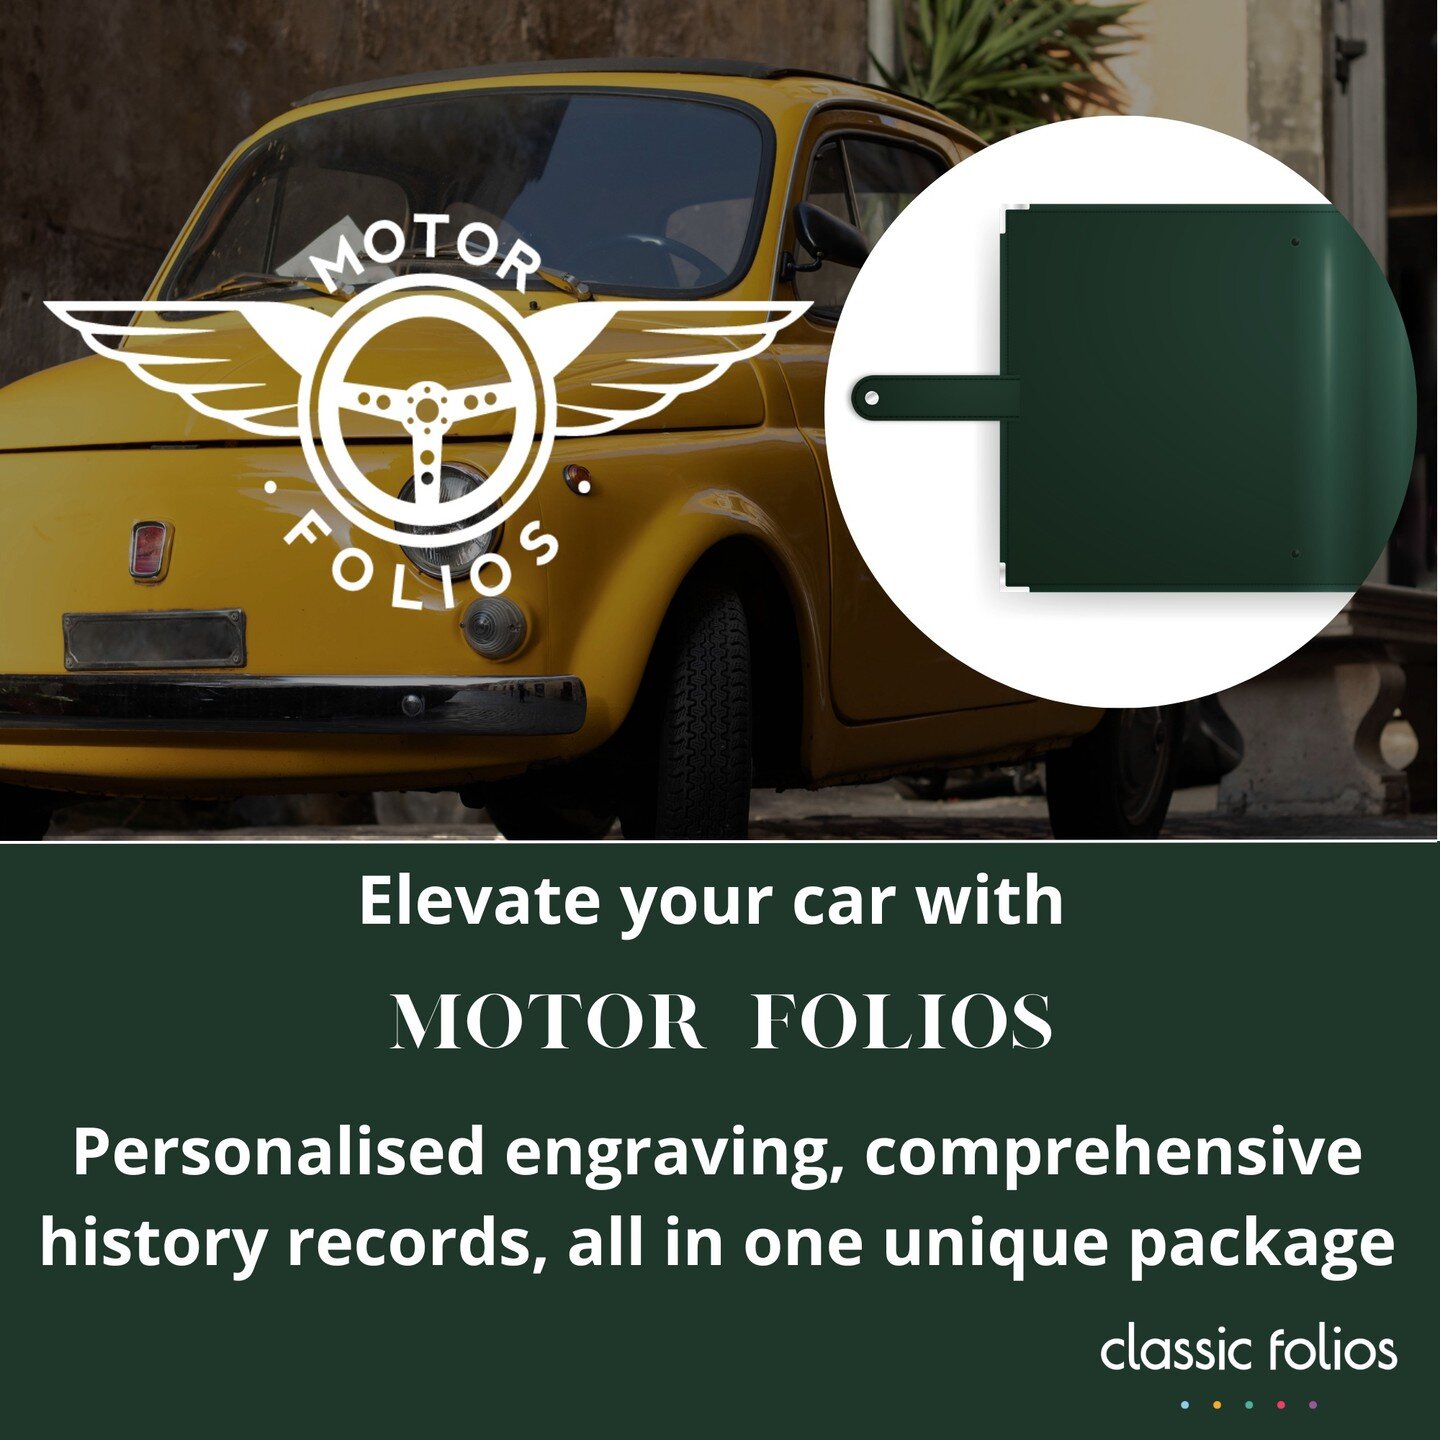 Every car enthusiast knows that each vehicle has its own unique story. With Motor Folios, you get to chronicle your car's journey with a personalised touch. Each folio is specially crafted with your car's marque, model, and registration number engrav